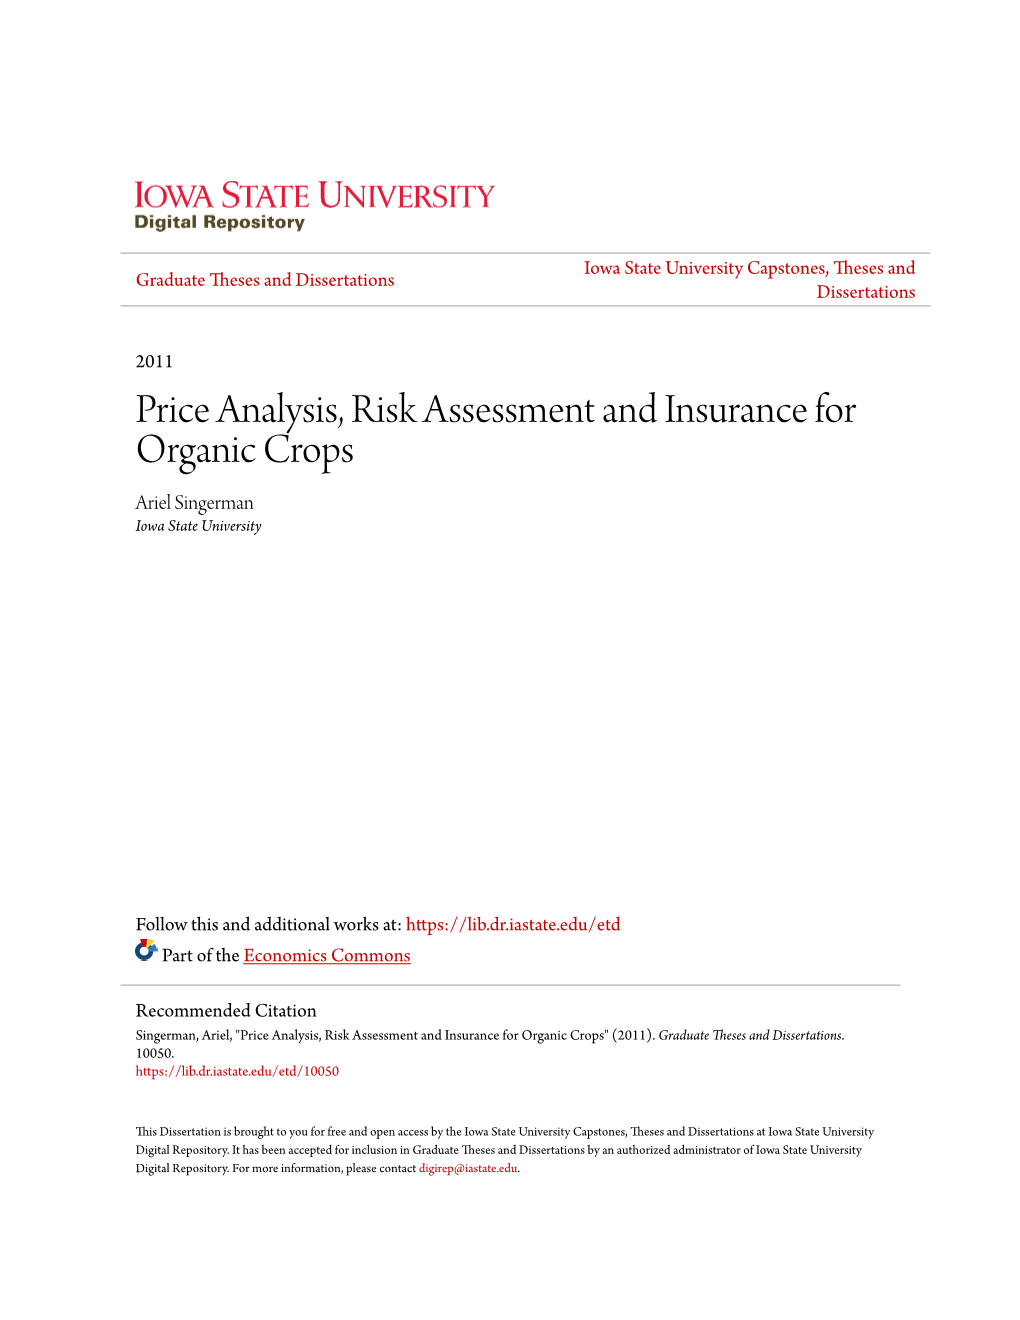 Price Analysis, Risk Assessment and Insurance for Organic Crops Ariel Singerman Iowa State University